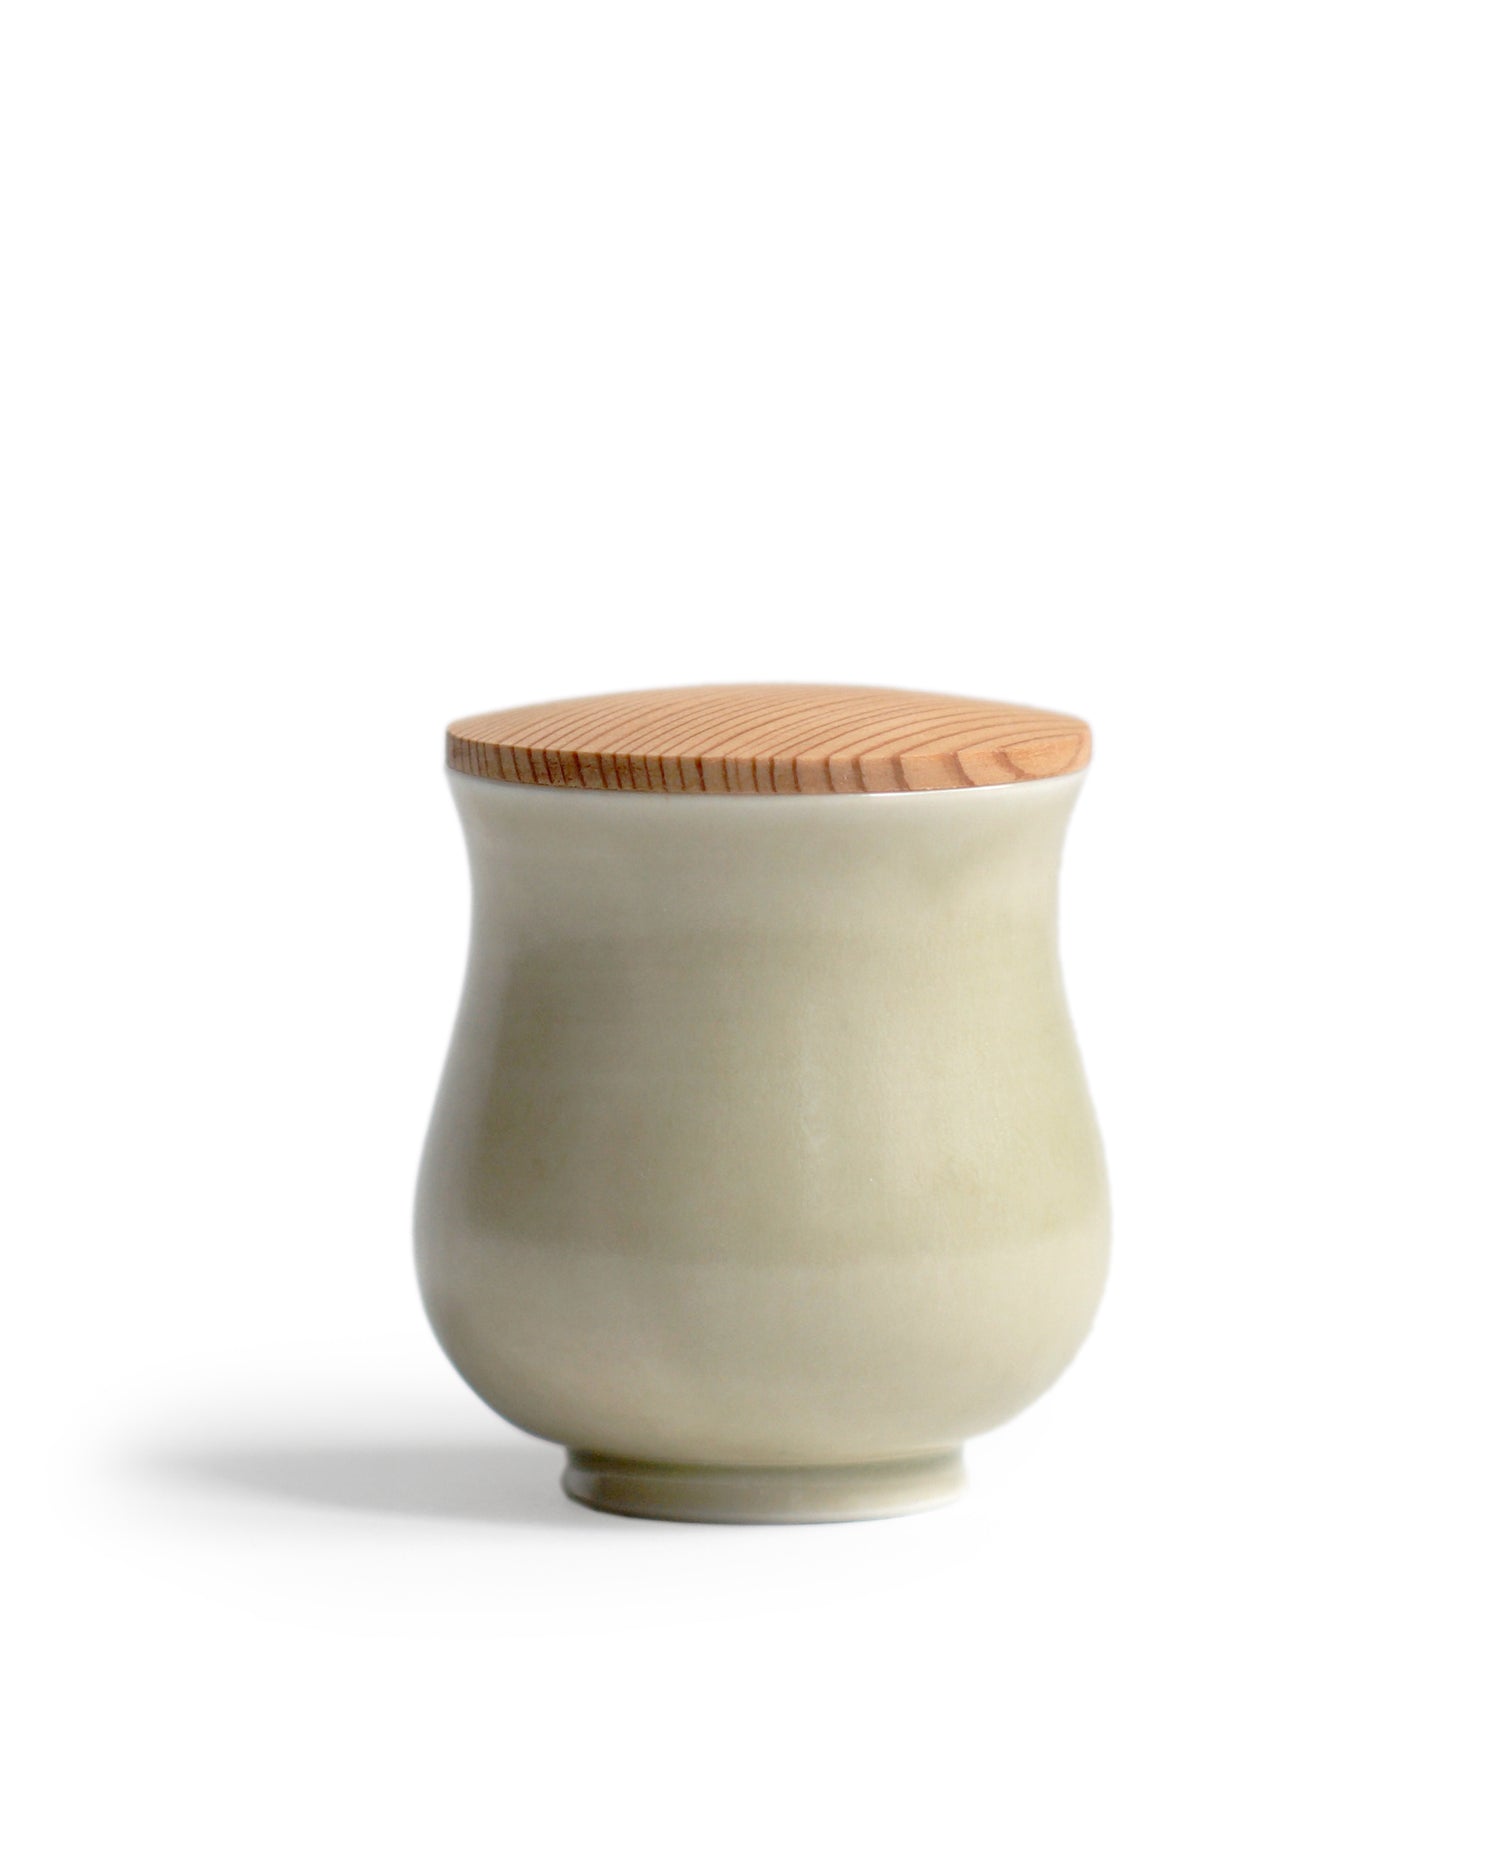 Cedar Lidded Gourd Teacup by Simplicity silhouetted against white background